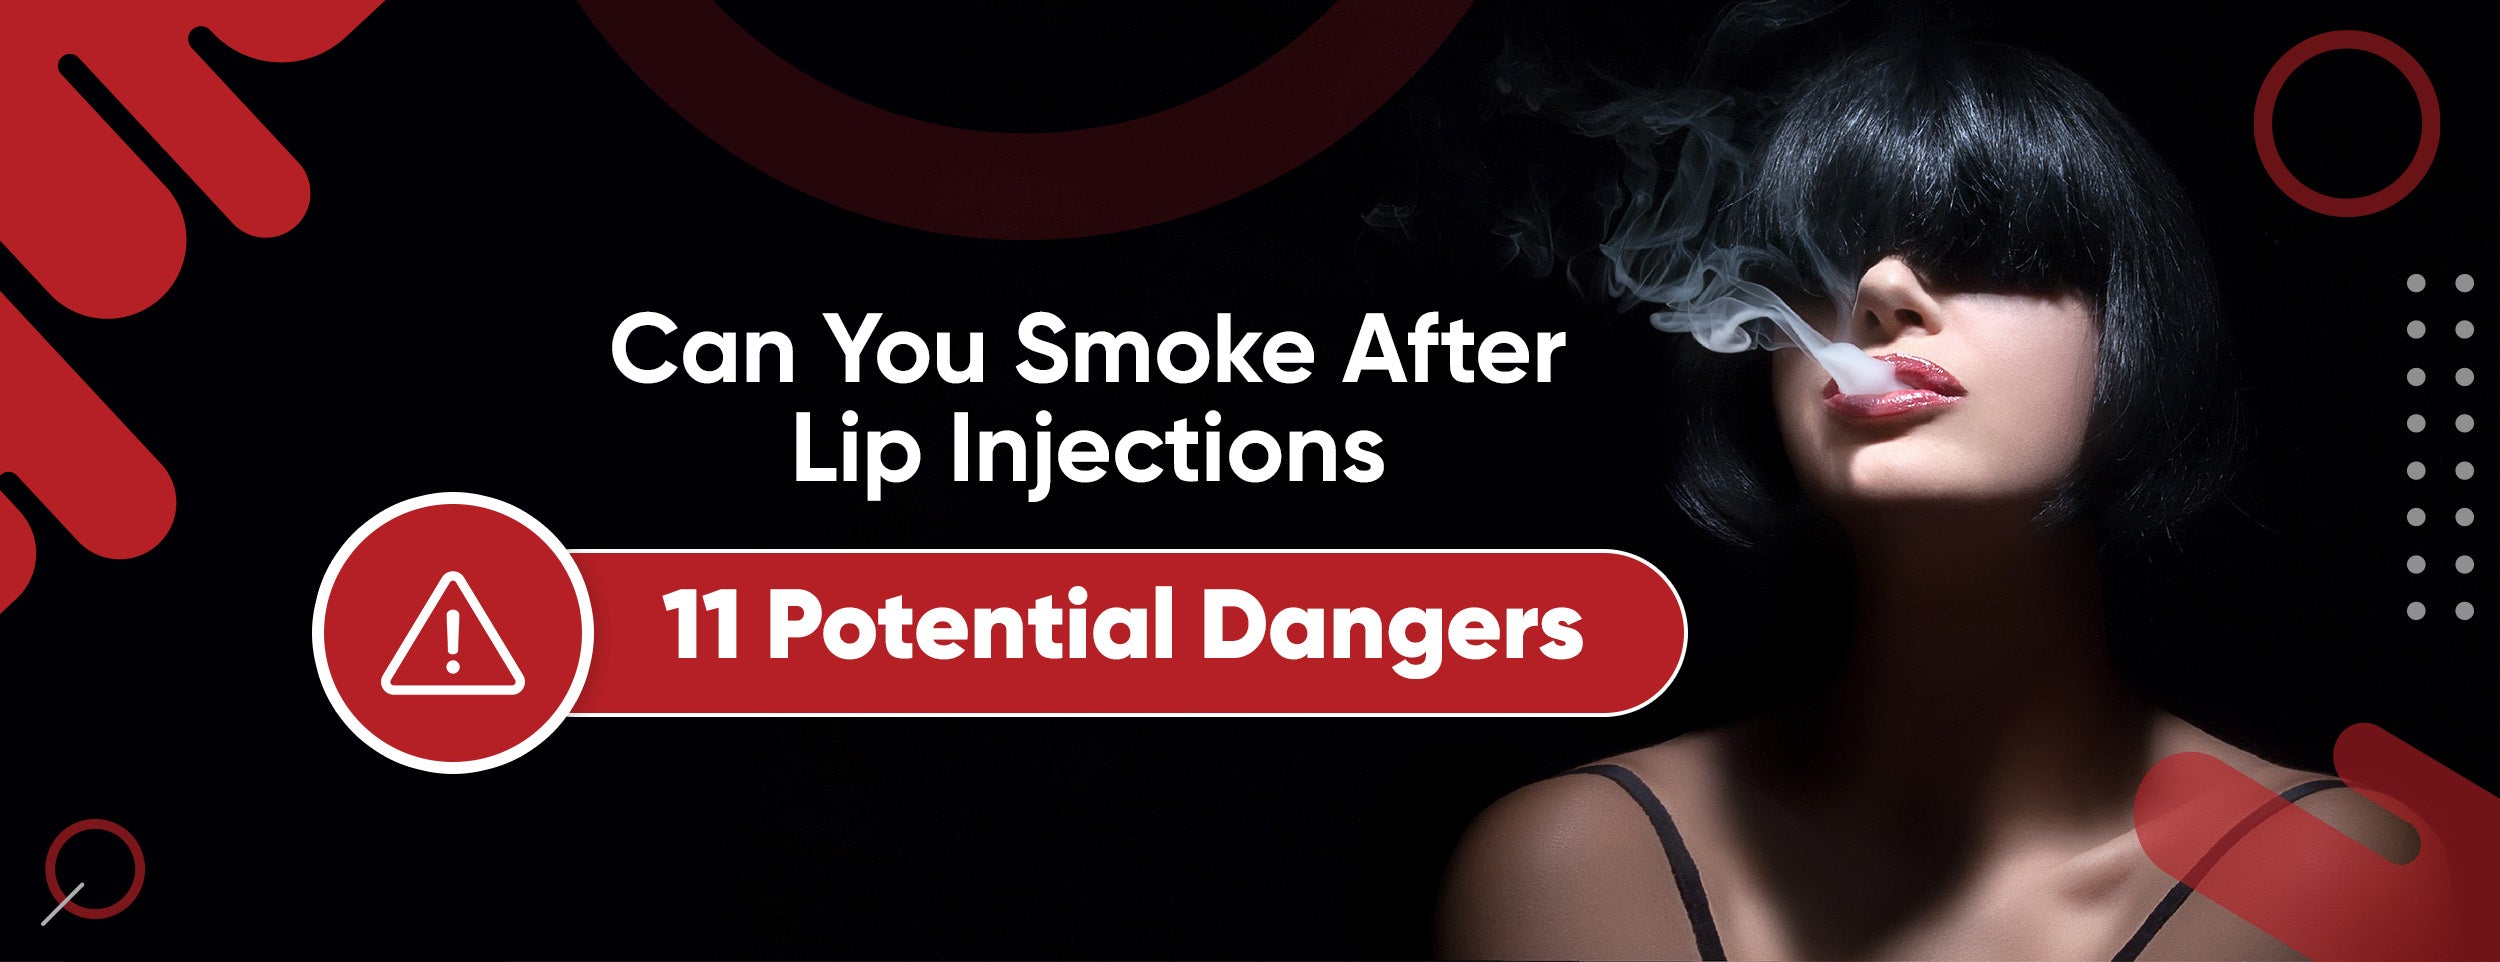 11 Potential Dangers & Smoke-Free Tips After Lip Injection